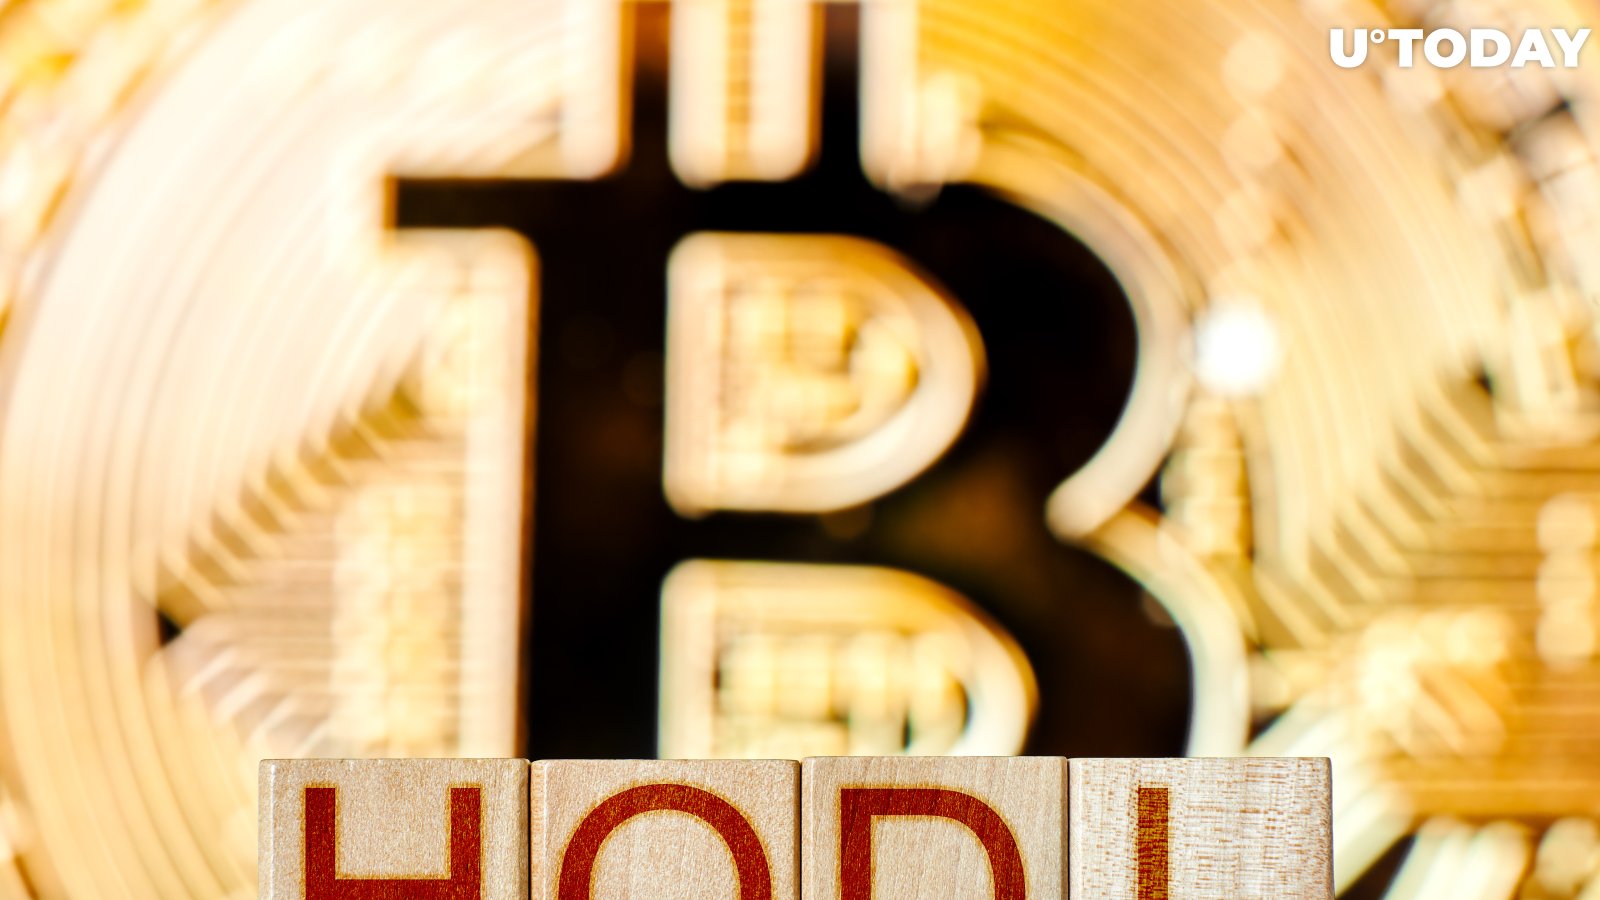 Bitcoiners Celebrating #HODLDay. See The Post That Started It 